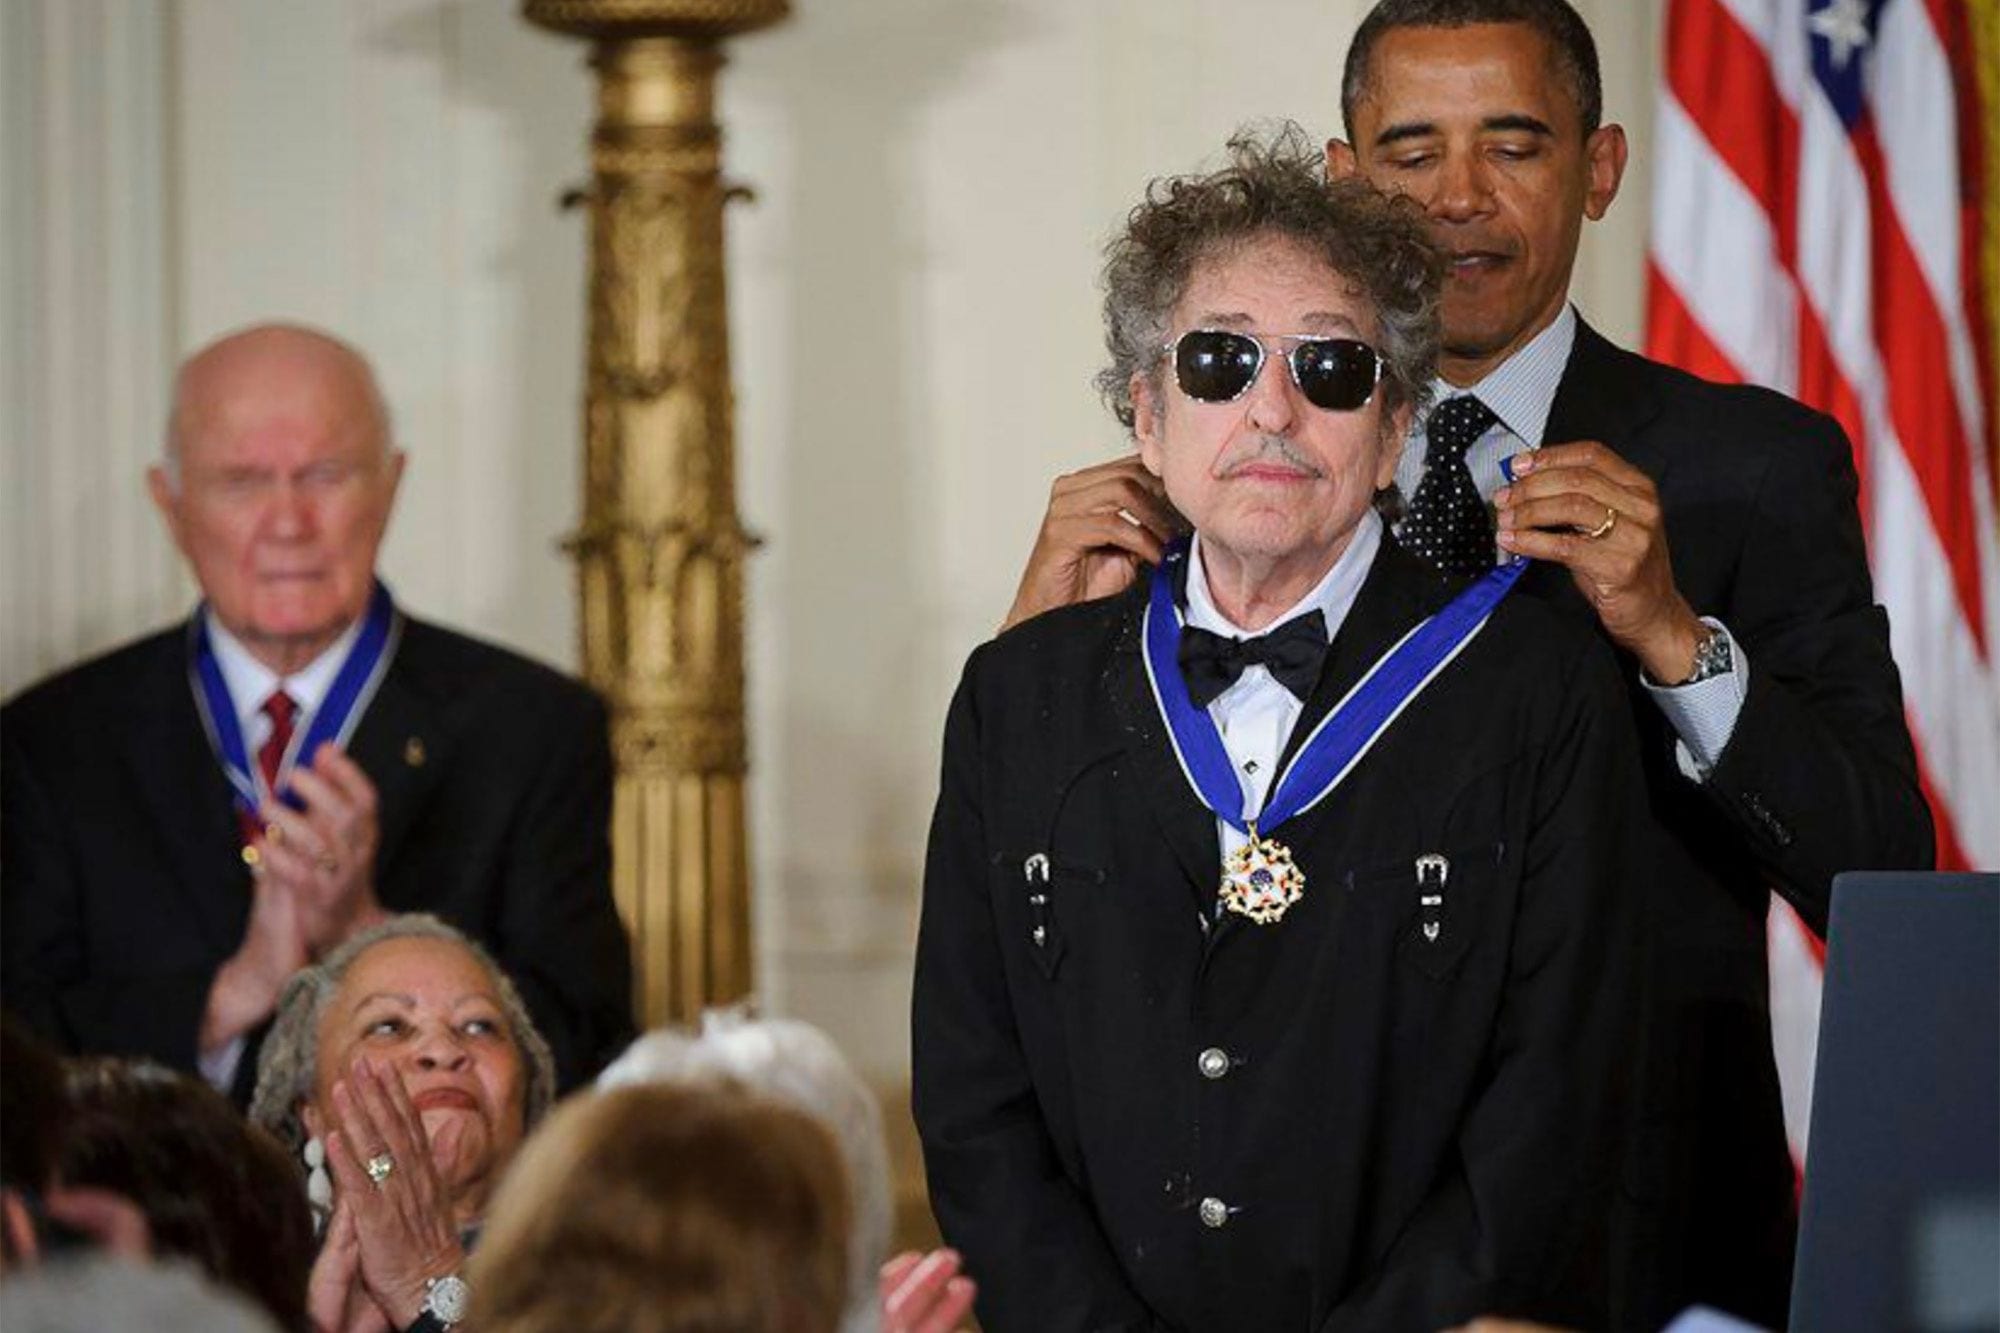 Is ‘Murder Most Foul’ Dylan’s State of the Union Address?